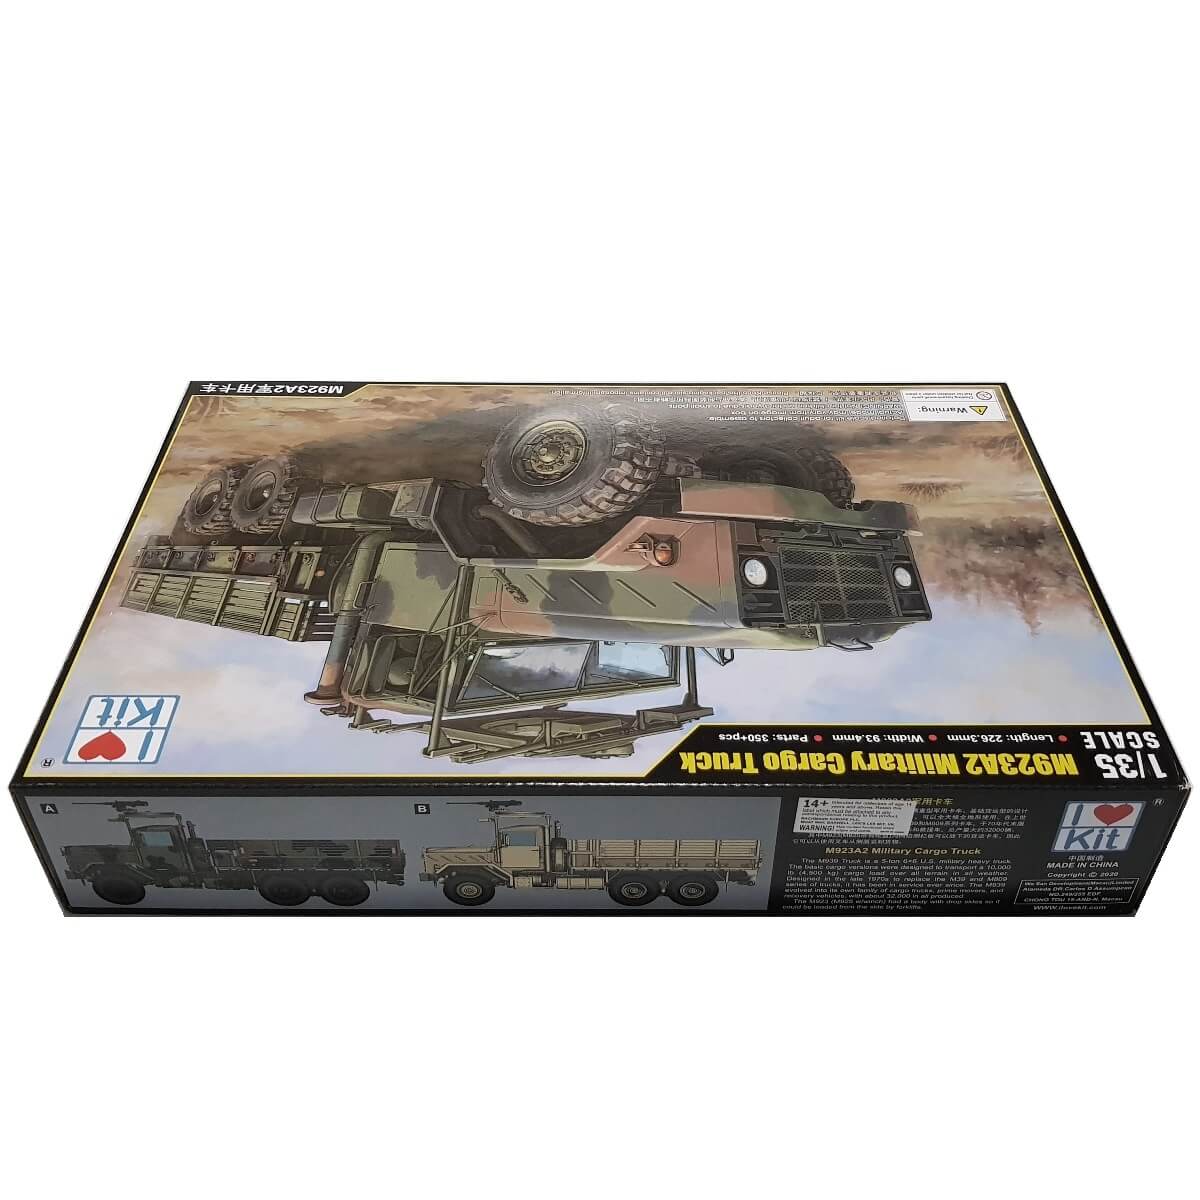 1:35 M923A2 Military Cargo Truck - I LOVE KIT